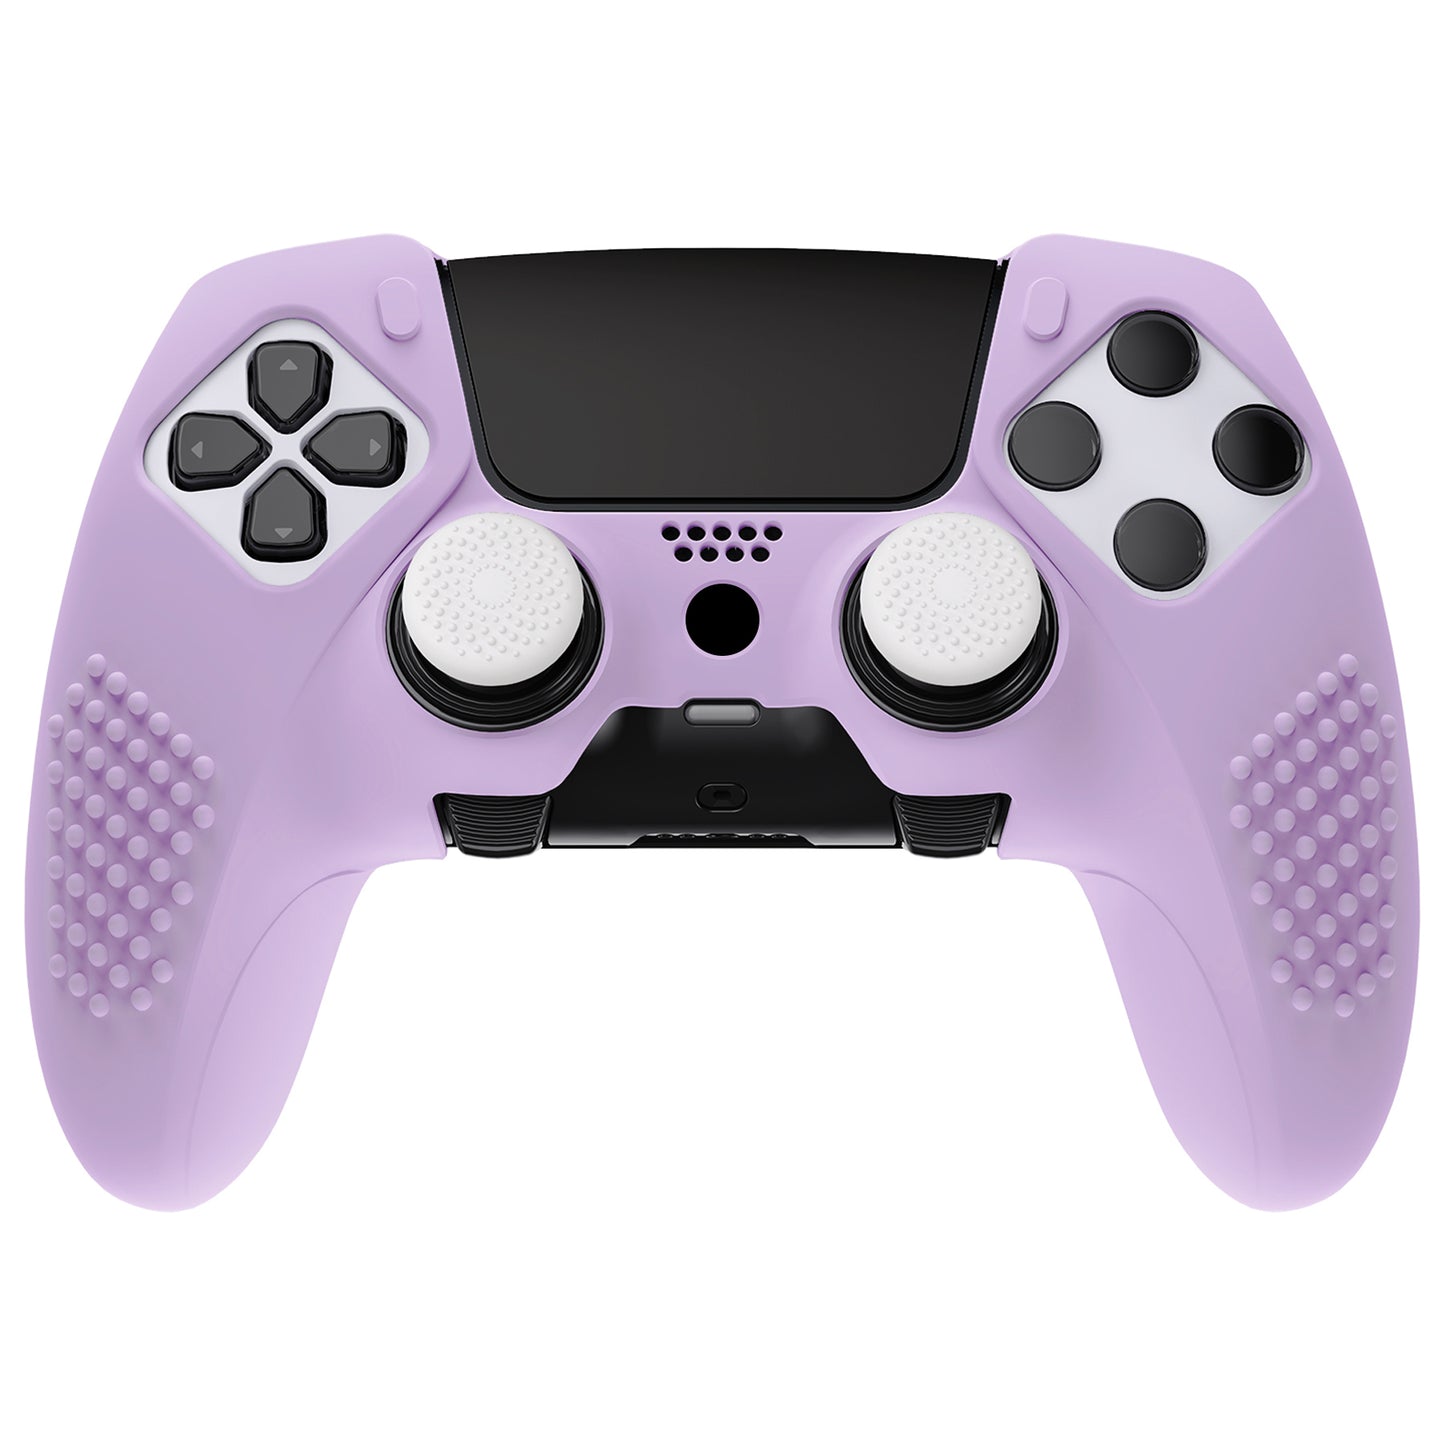 PlayVital 3D Studded Edition Anti-Slip Silicone Cover Case with Thumb Grip Caps for PS5 Edge Controller - Mauve Purple - ETPFP011 PlayVital